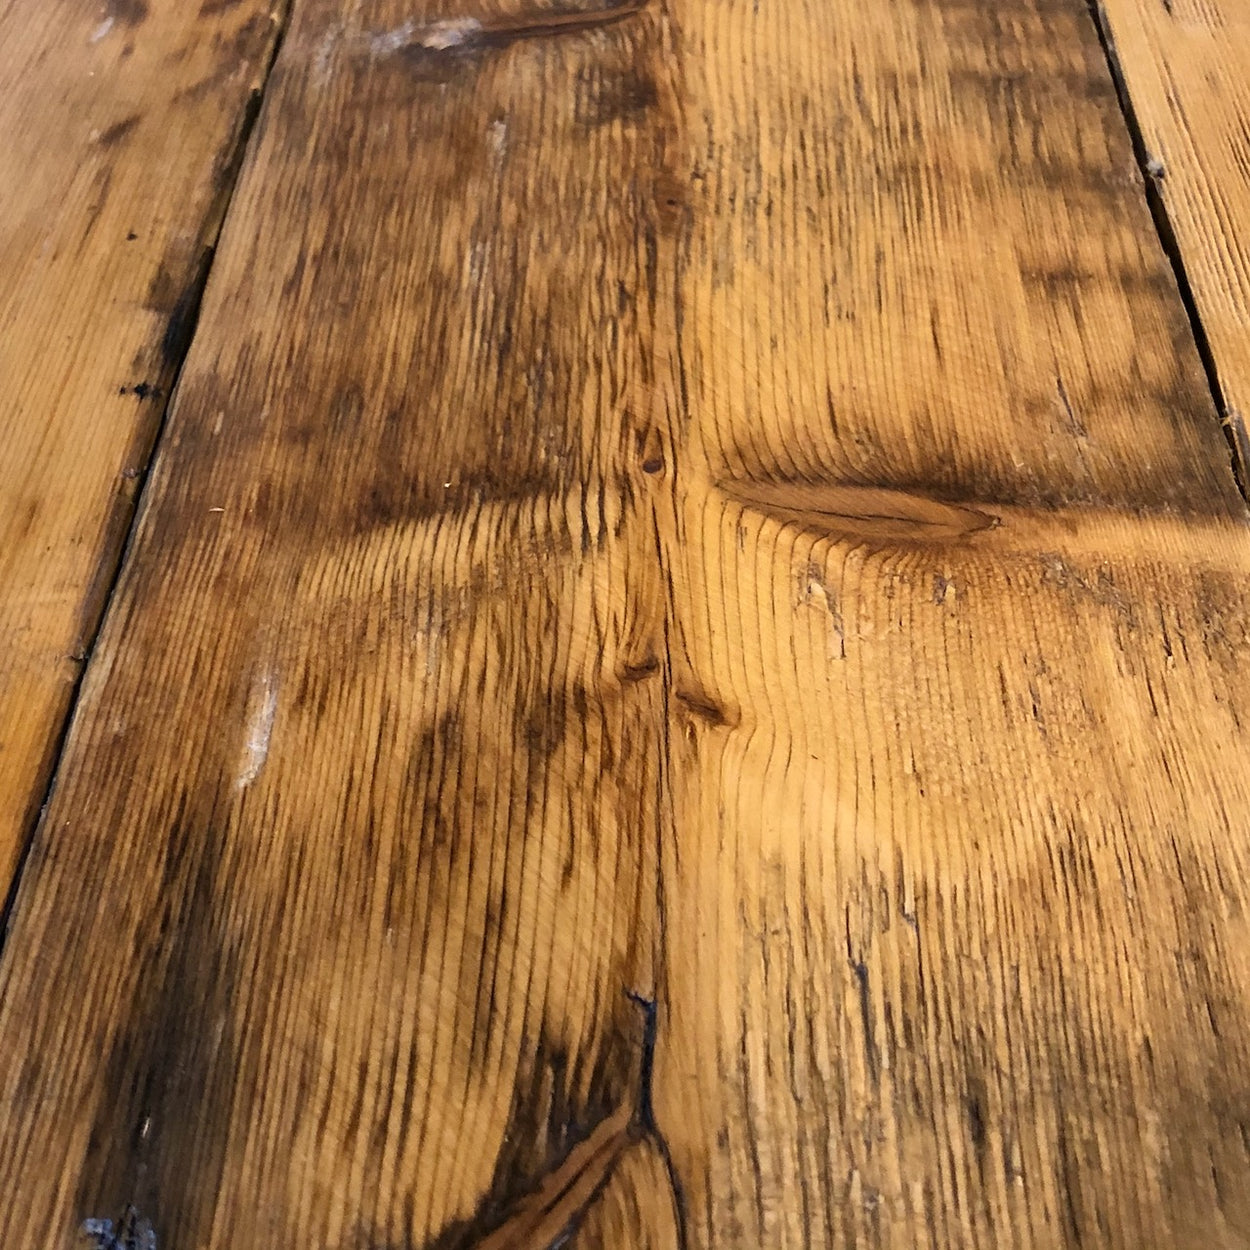 Manchester Mill Reclaimed Floorboards